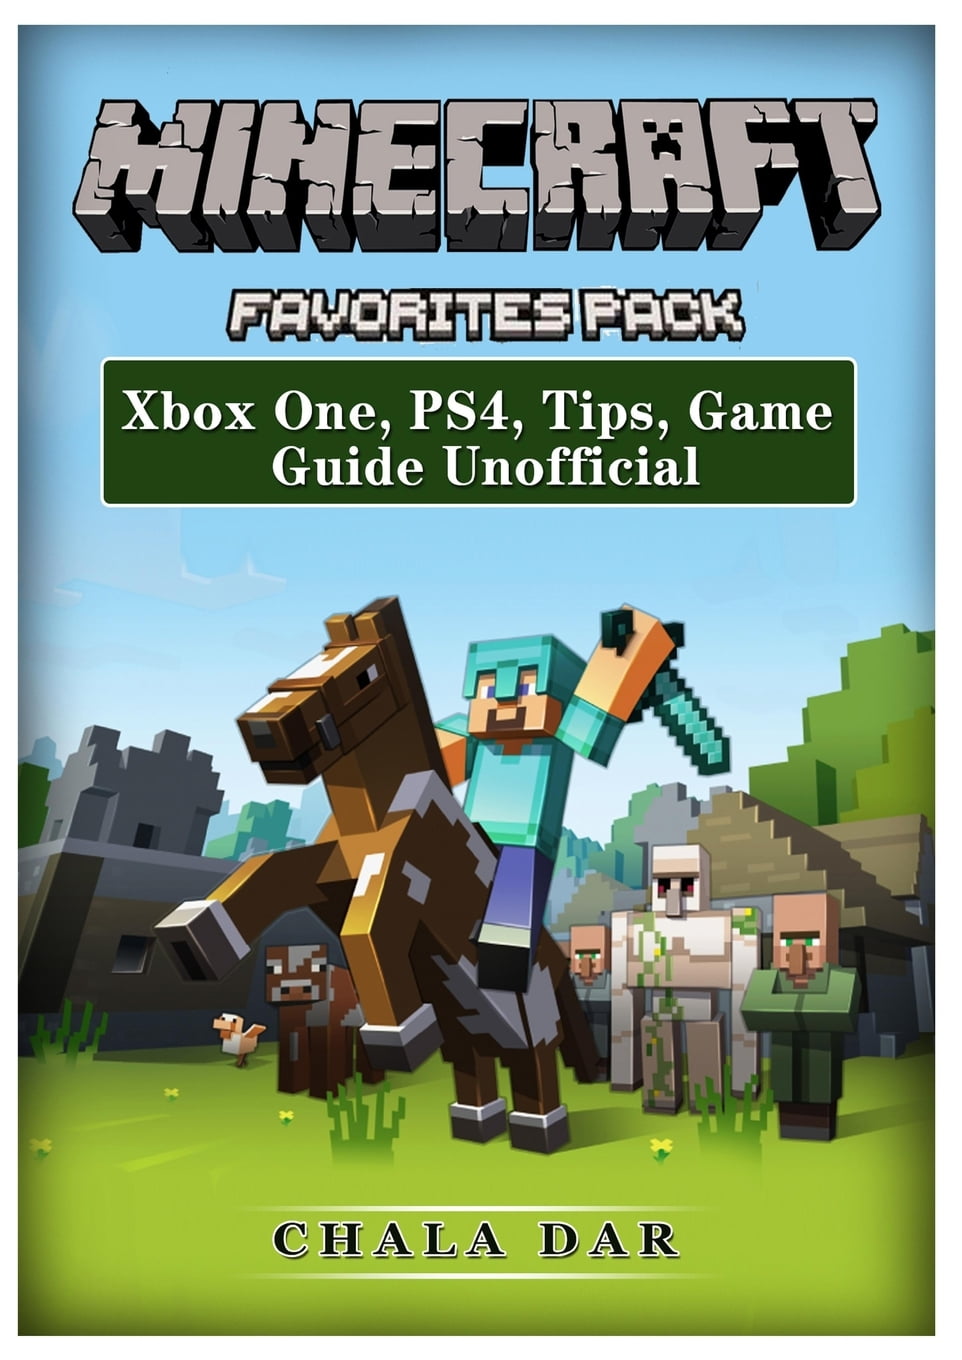 Minecraft Favorites Pack Xbox One Ps4 Tips Game Guide Unofficial Walmart Com